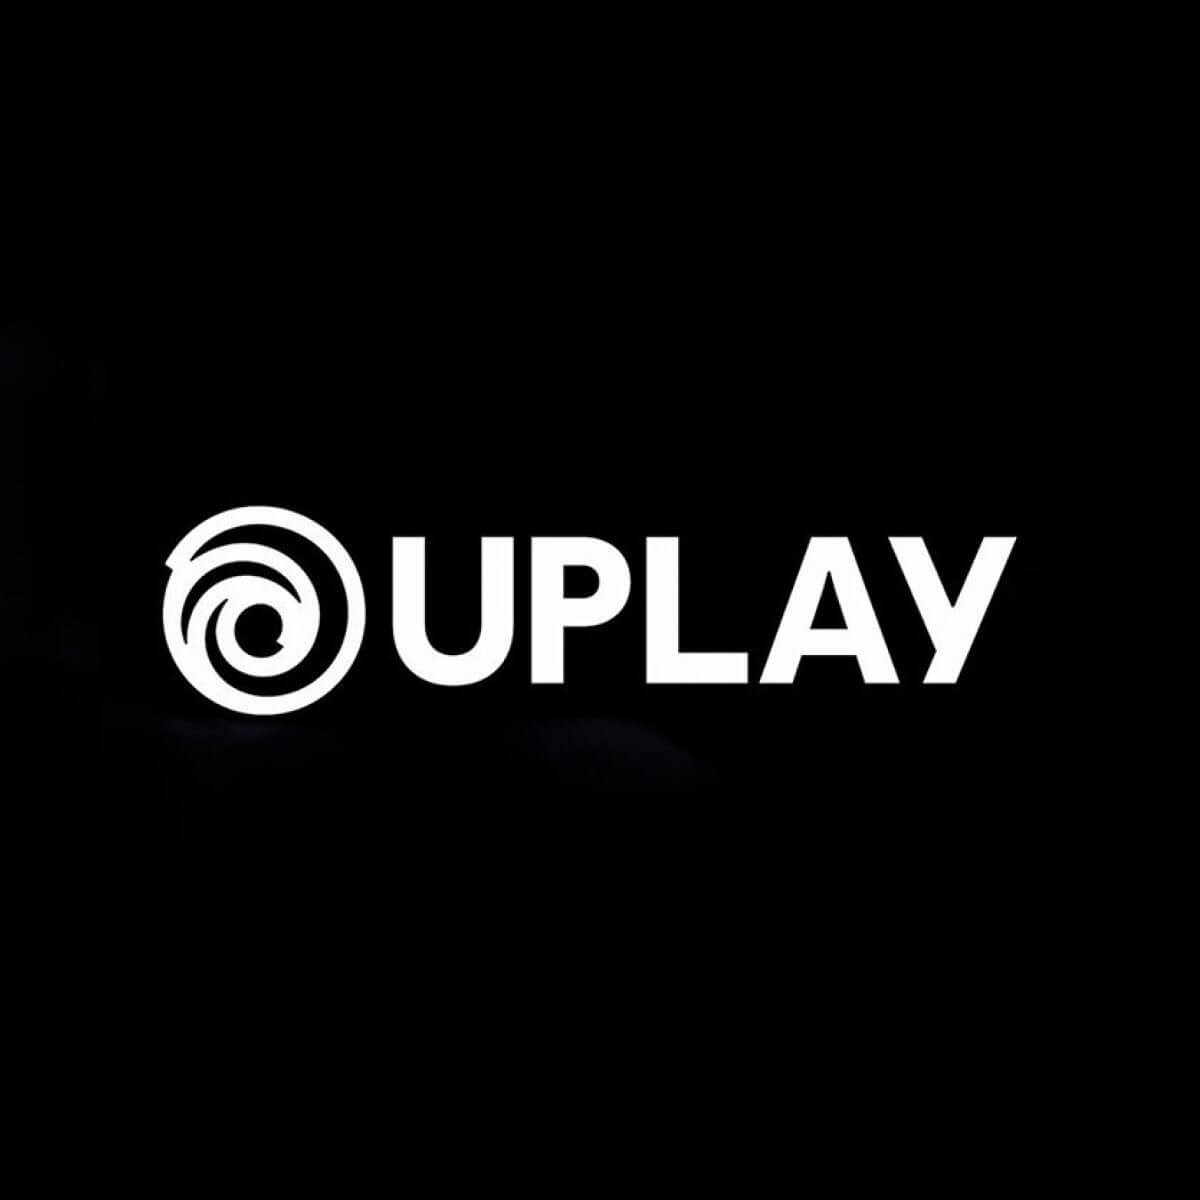 Uplay download issues